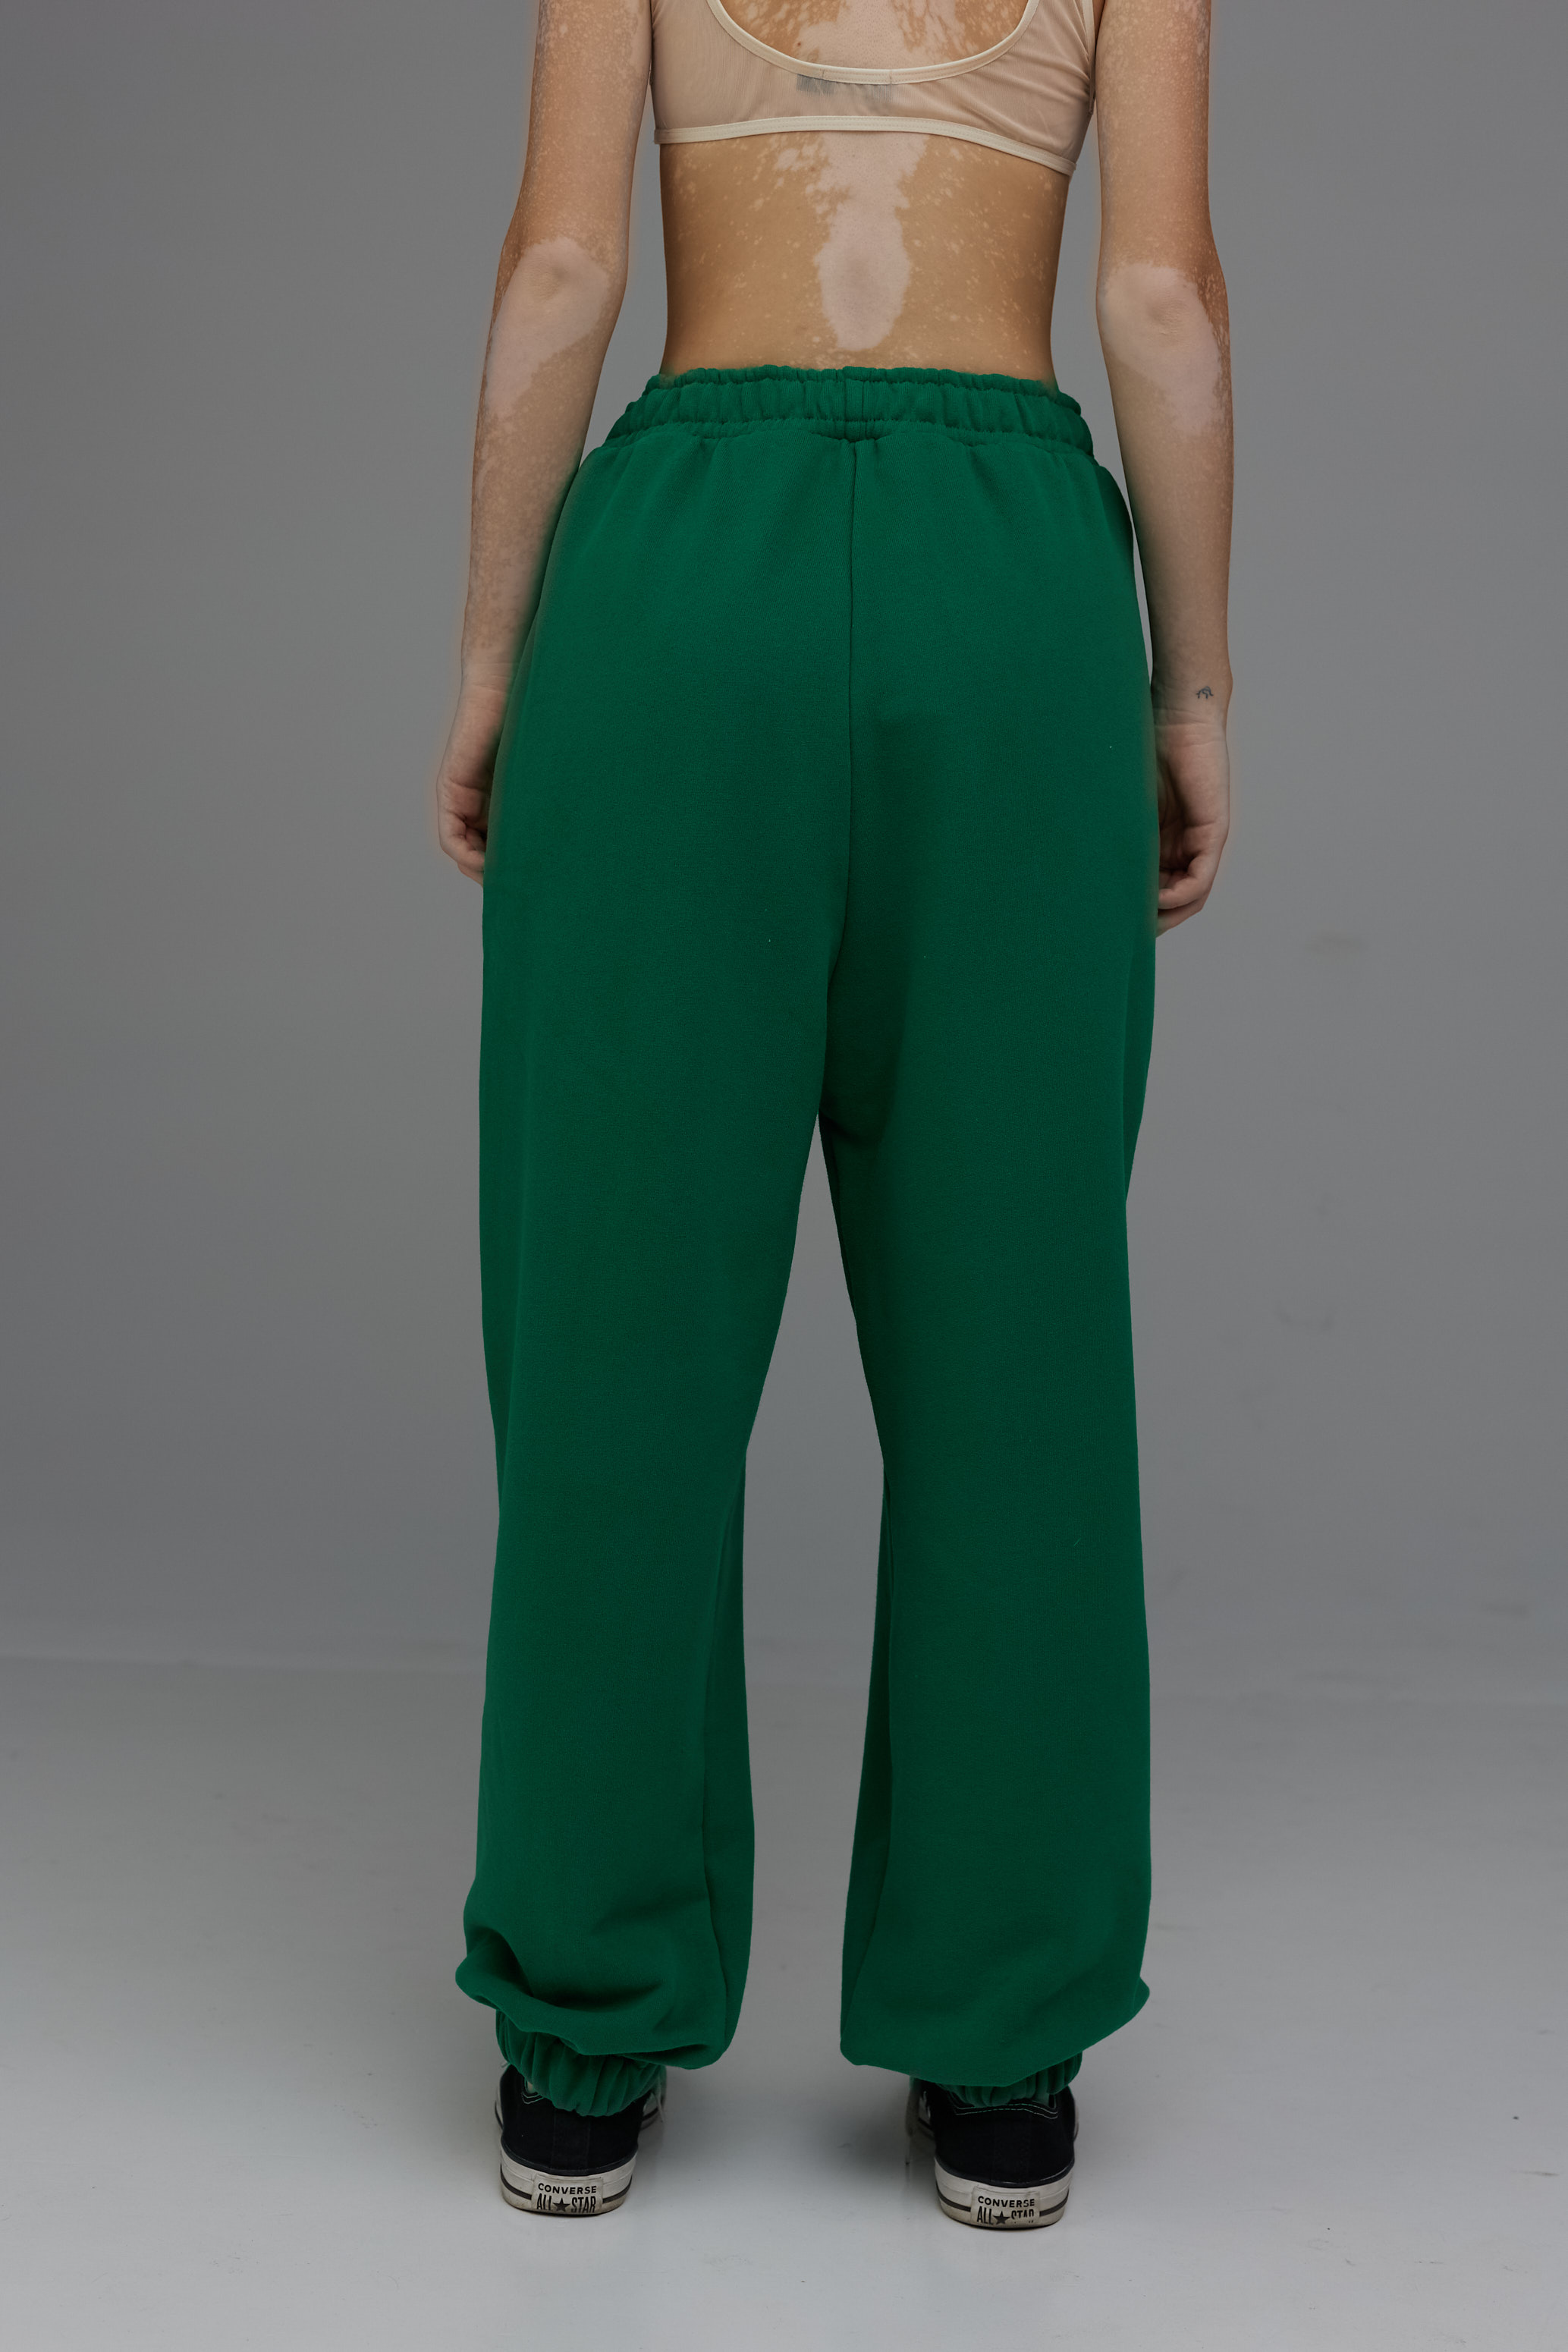 groove pants in watermelon color